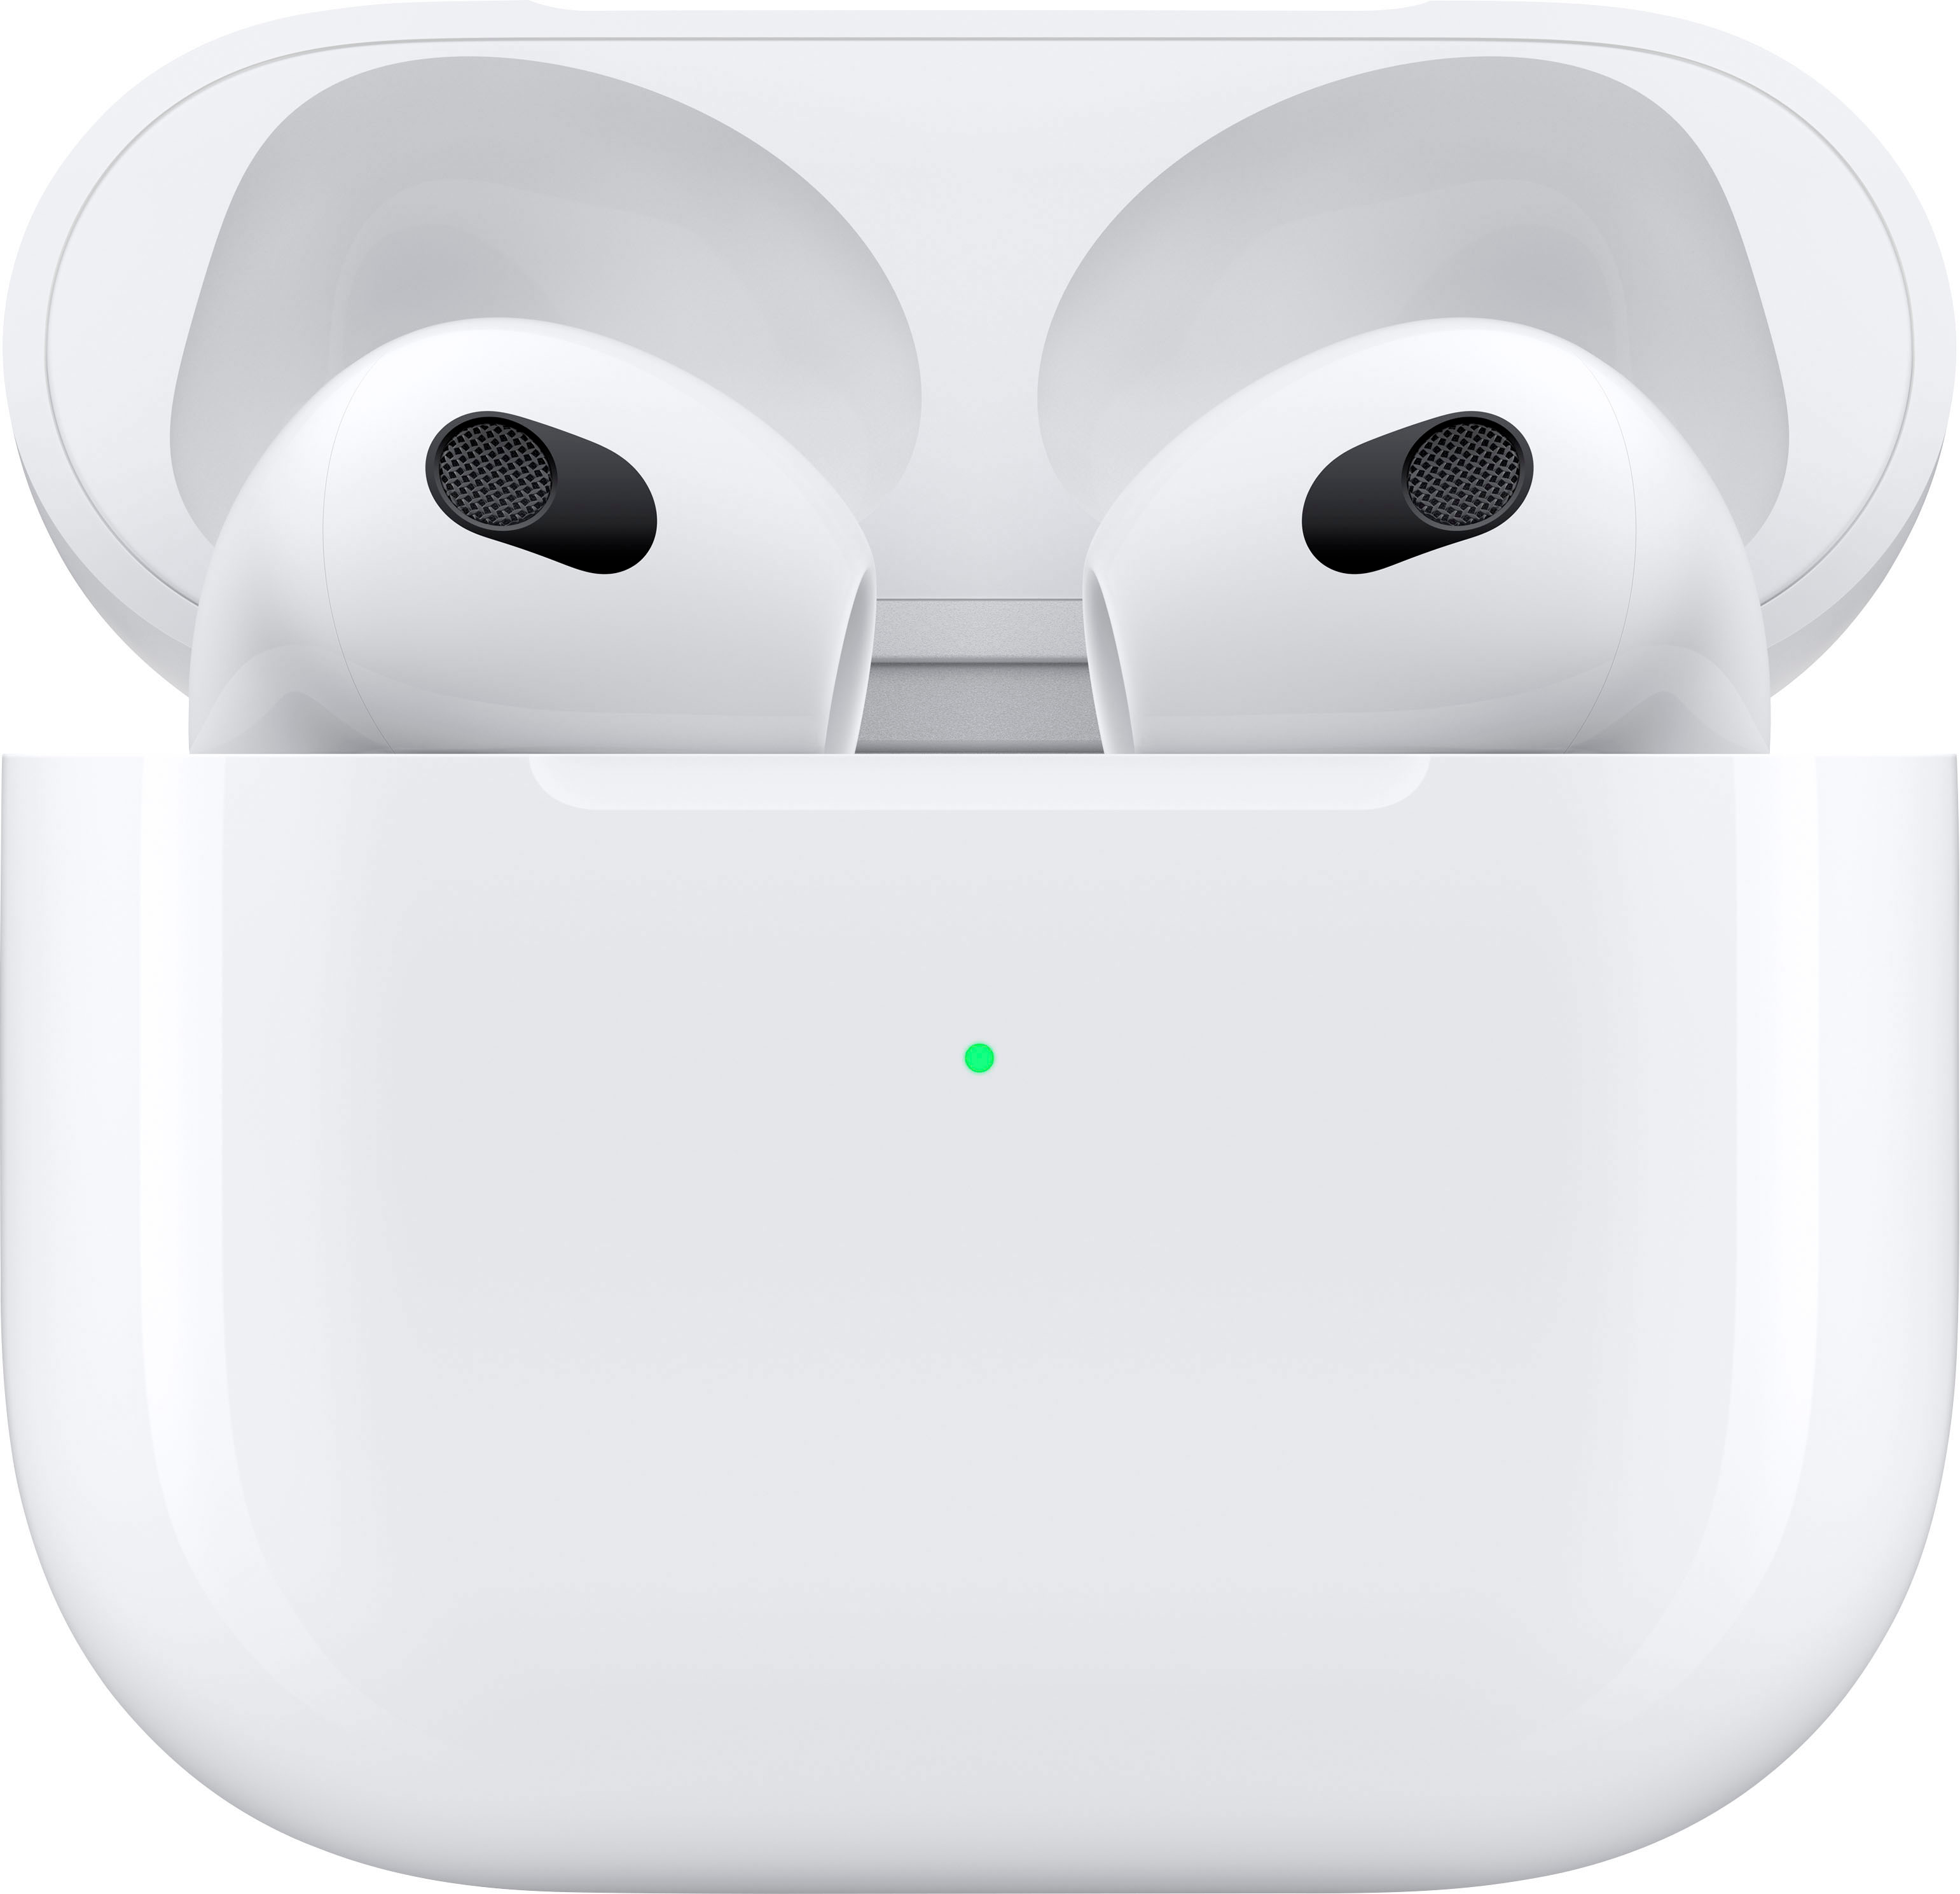 AirPods (3rd generation) with MagSafe Charging Case 